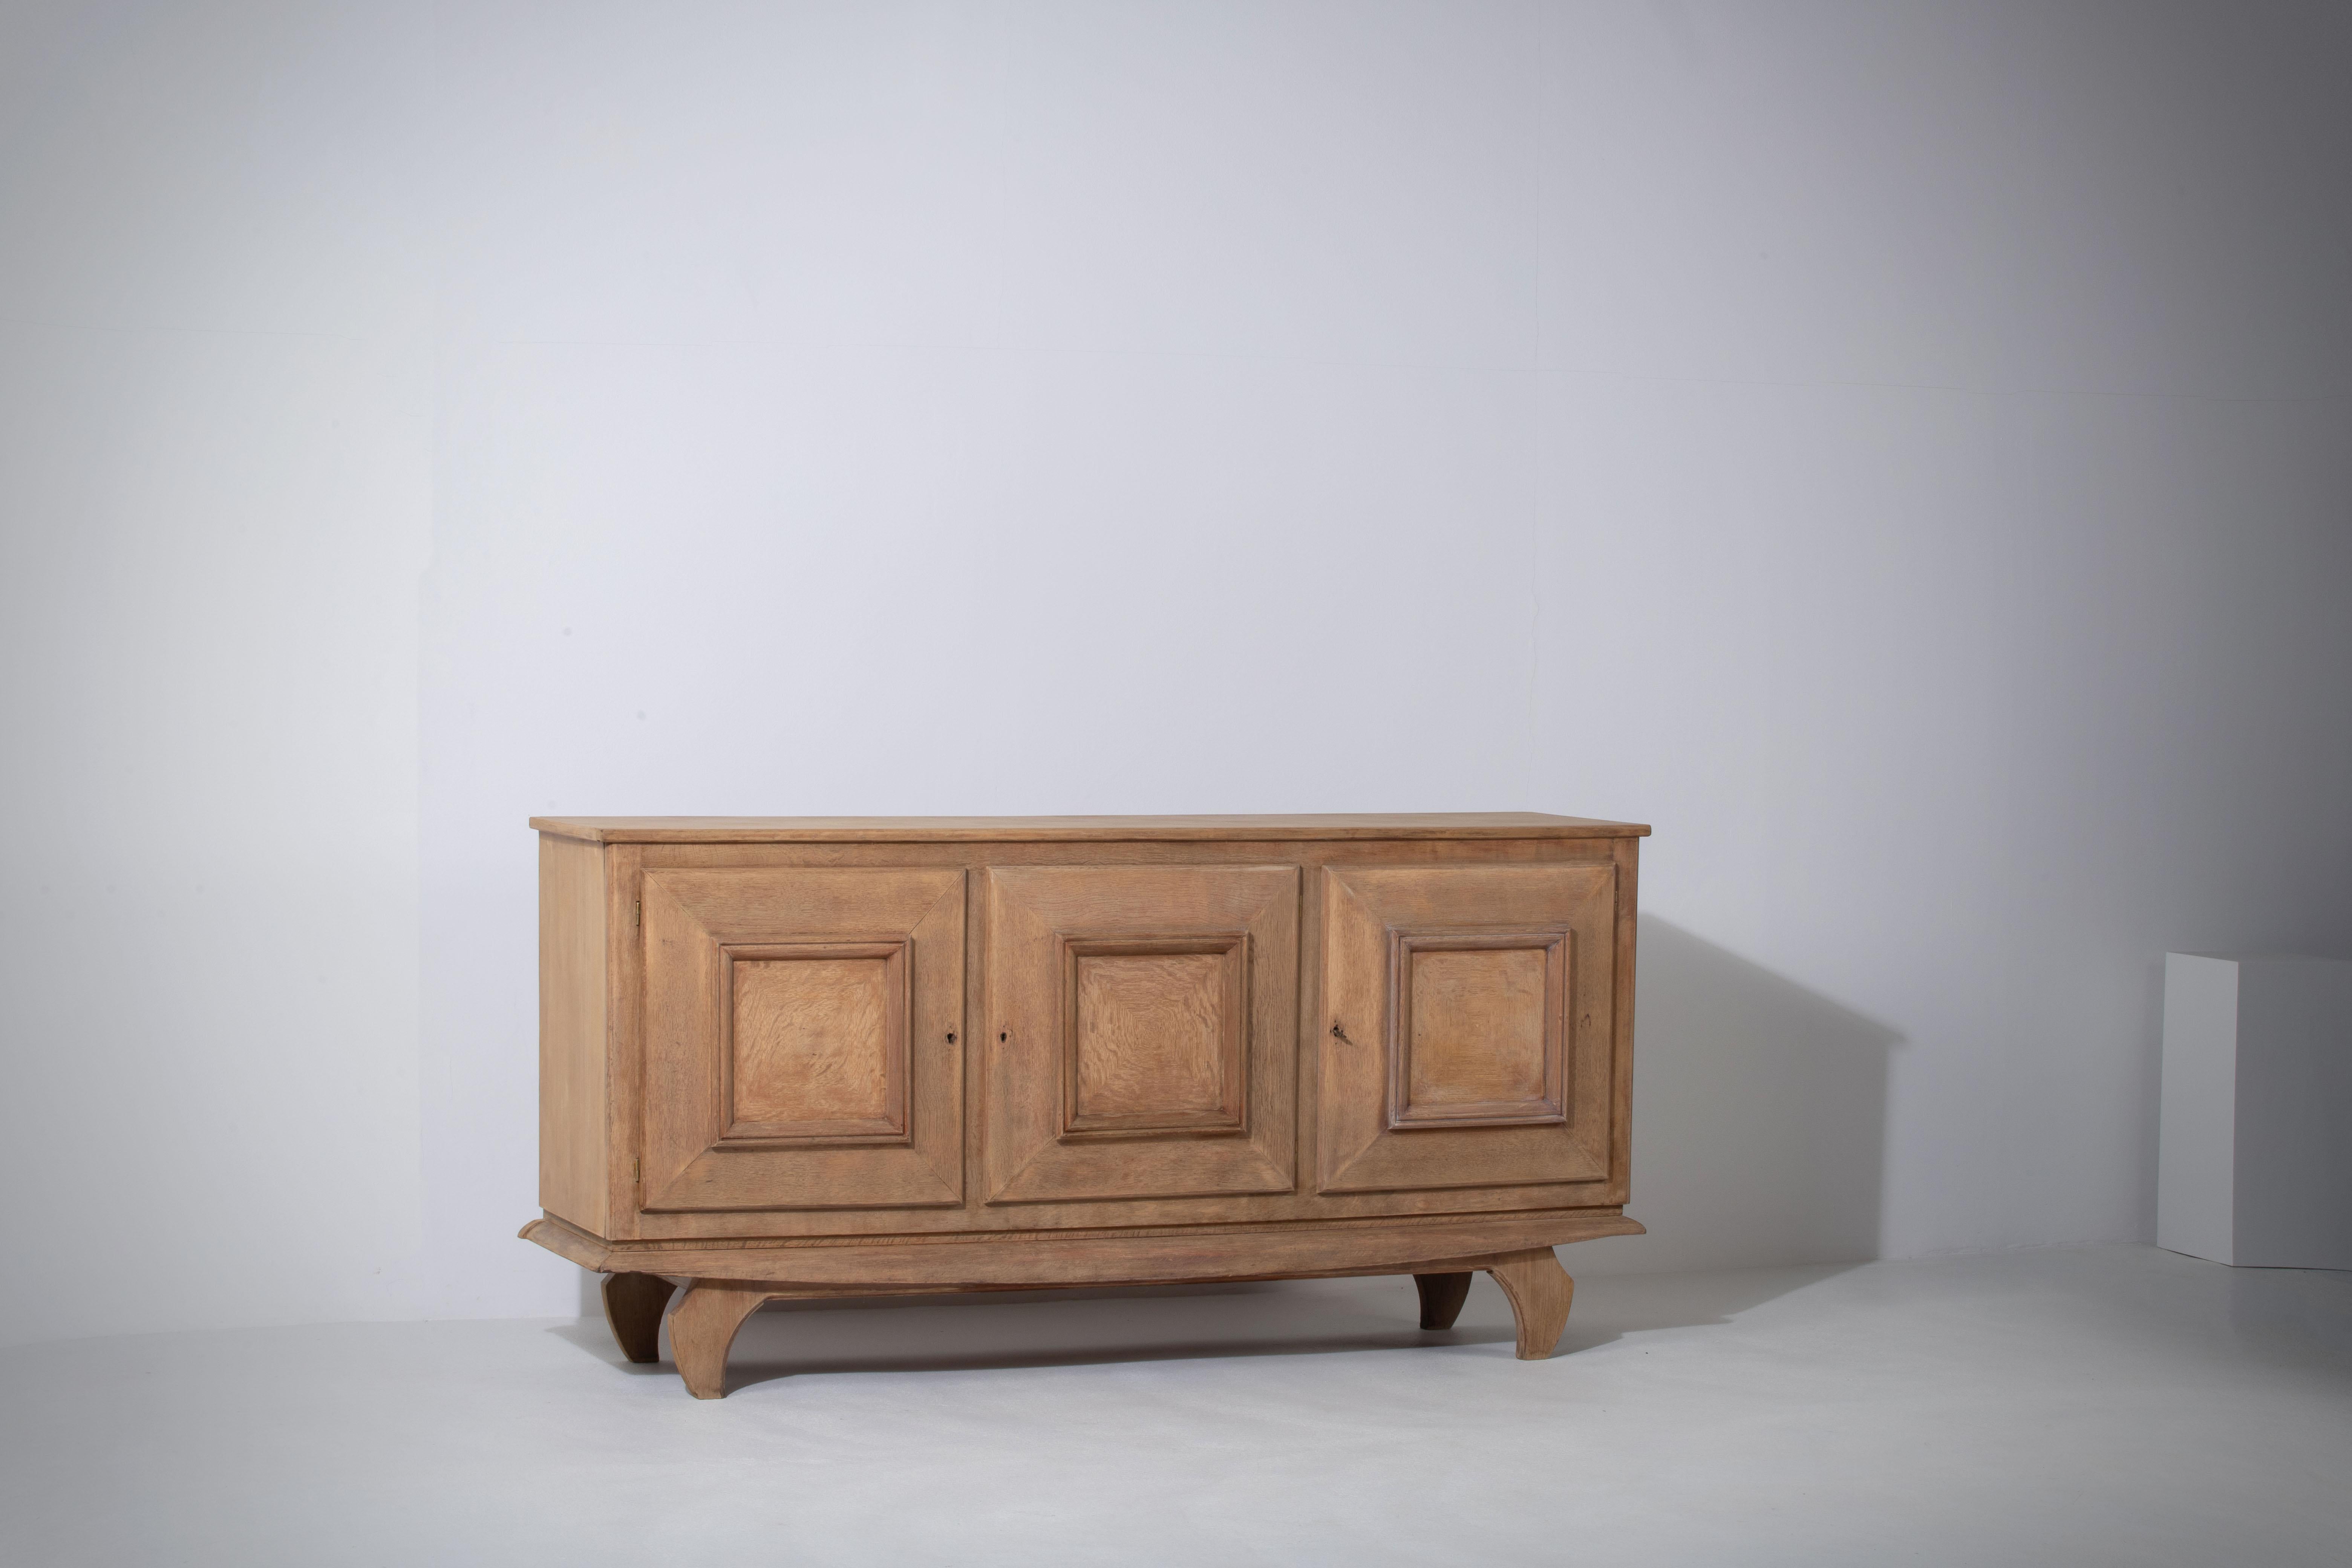 Introducing an elegant oak sideboard from the end of the 1940s, showcasing a timeless design that blends simplicity and authenticity. This captivating piece stands gracefully on curved legs, embodying the refined aesthetic of the era.

Featuring a